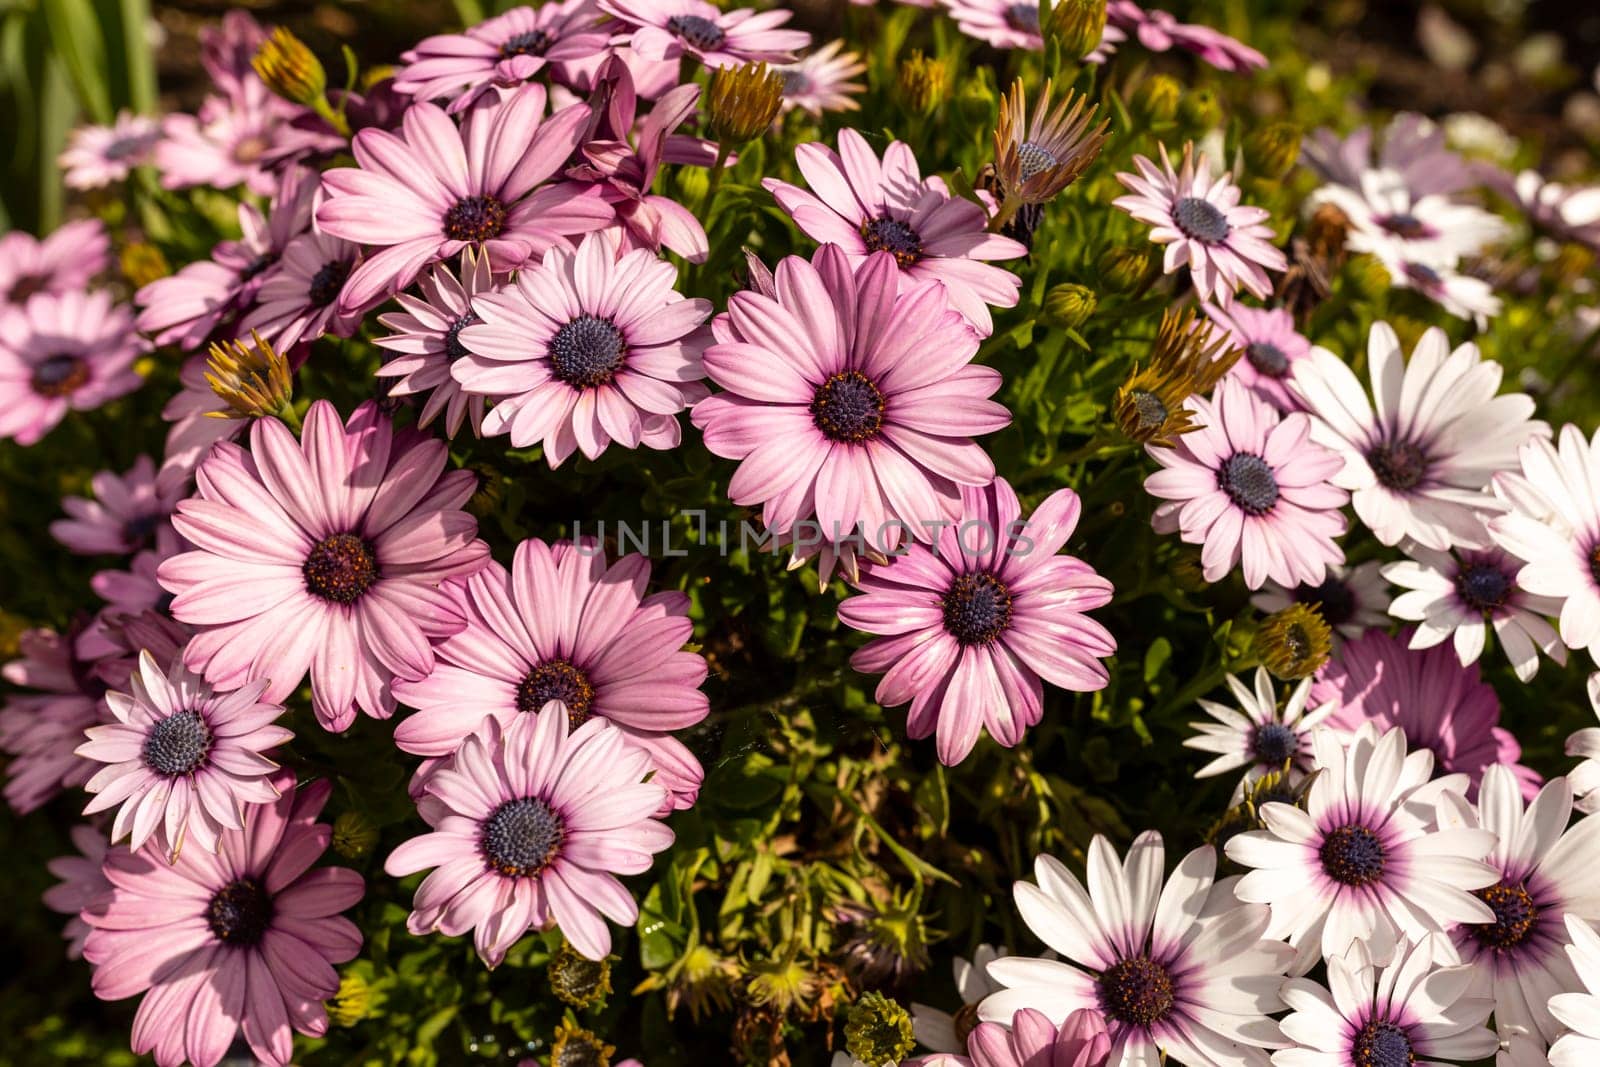 Many Purple Pink And White Osteospermum Flower Outdoor, African Daisy Or Sunny Xena With Green Leaves. Blooming Evergreen Garden. Flora and Landscape Design. Botany. Horizontal Plane by netatsi